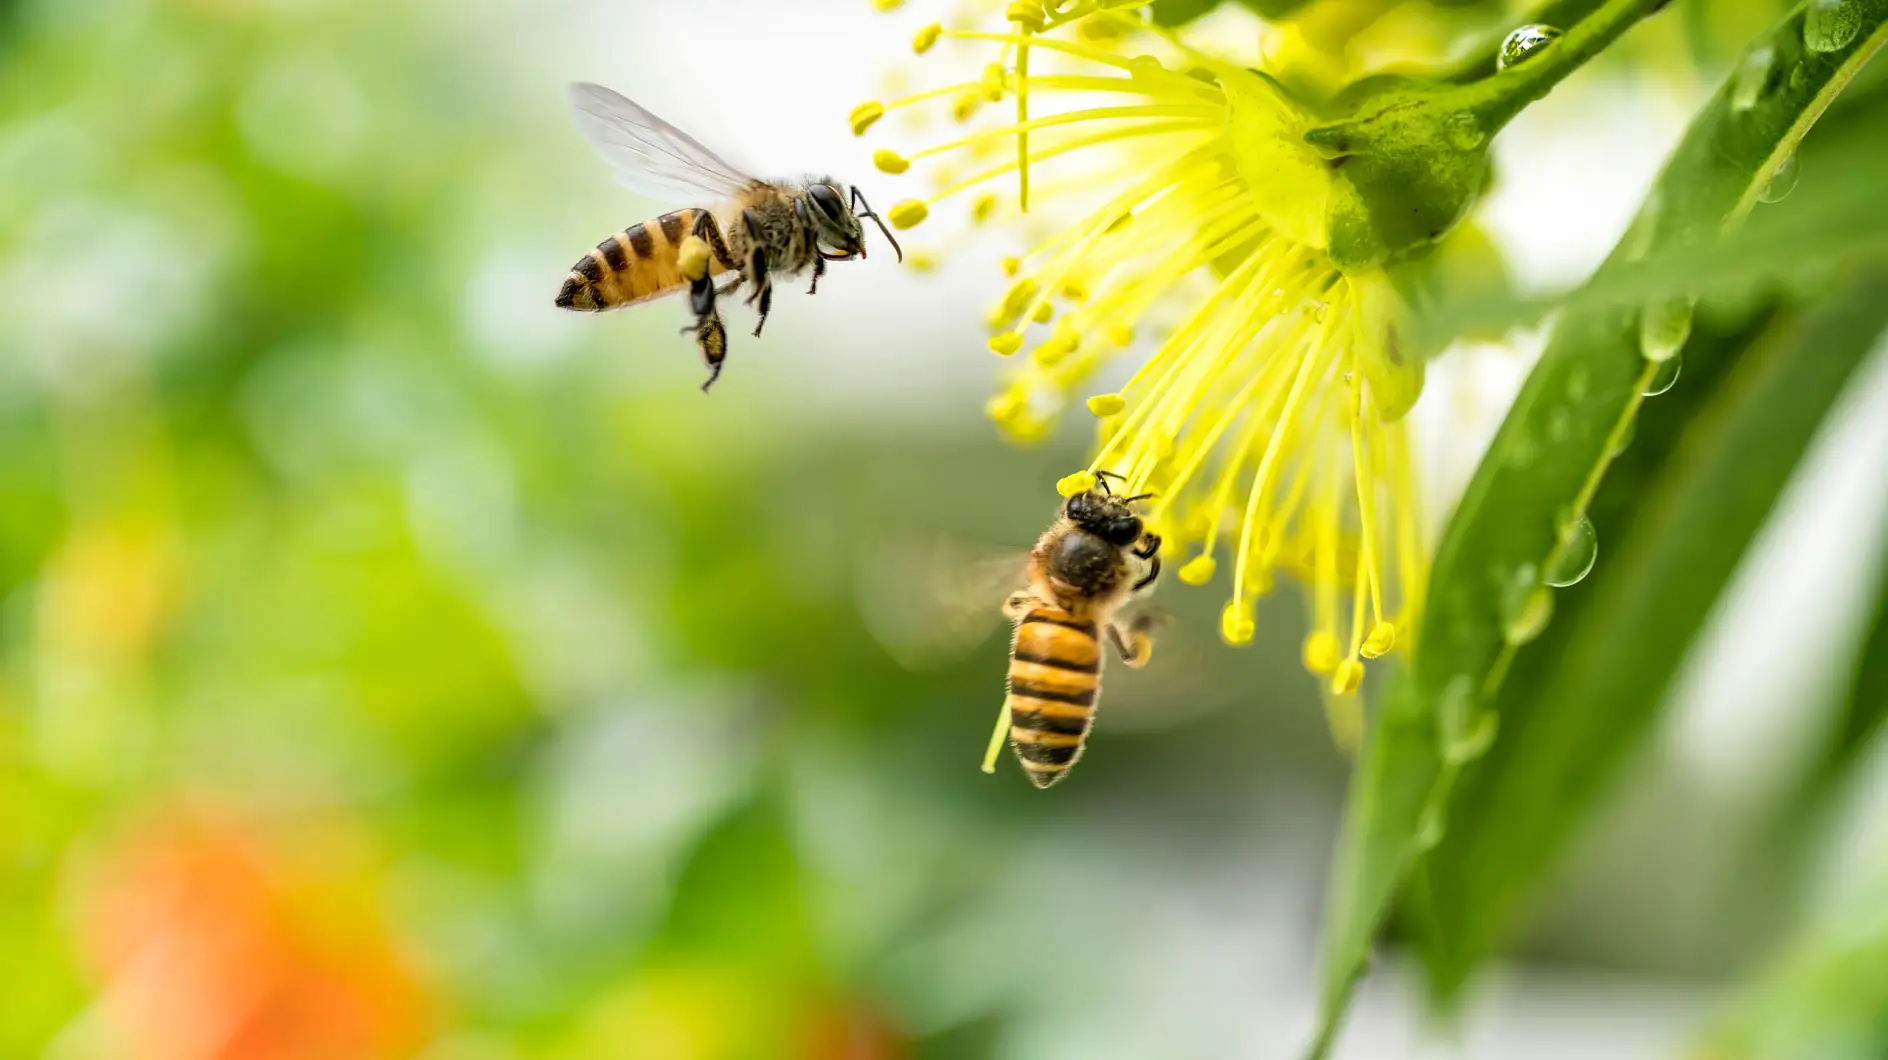 Flying honey bee collecting pollen at yellow flower. Bee flying over the yellow flower